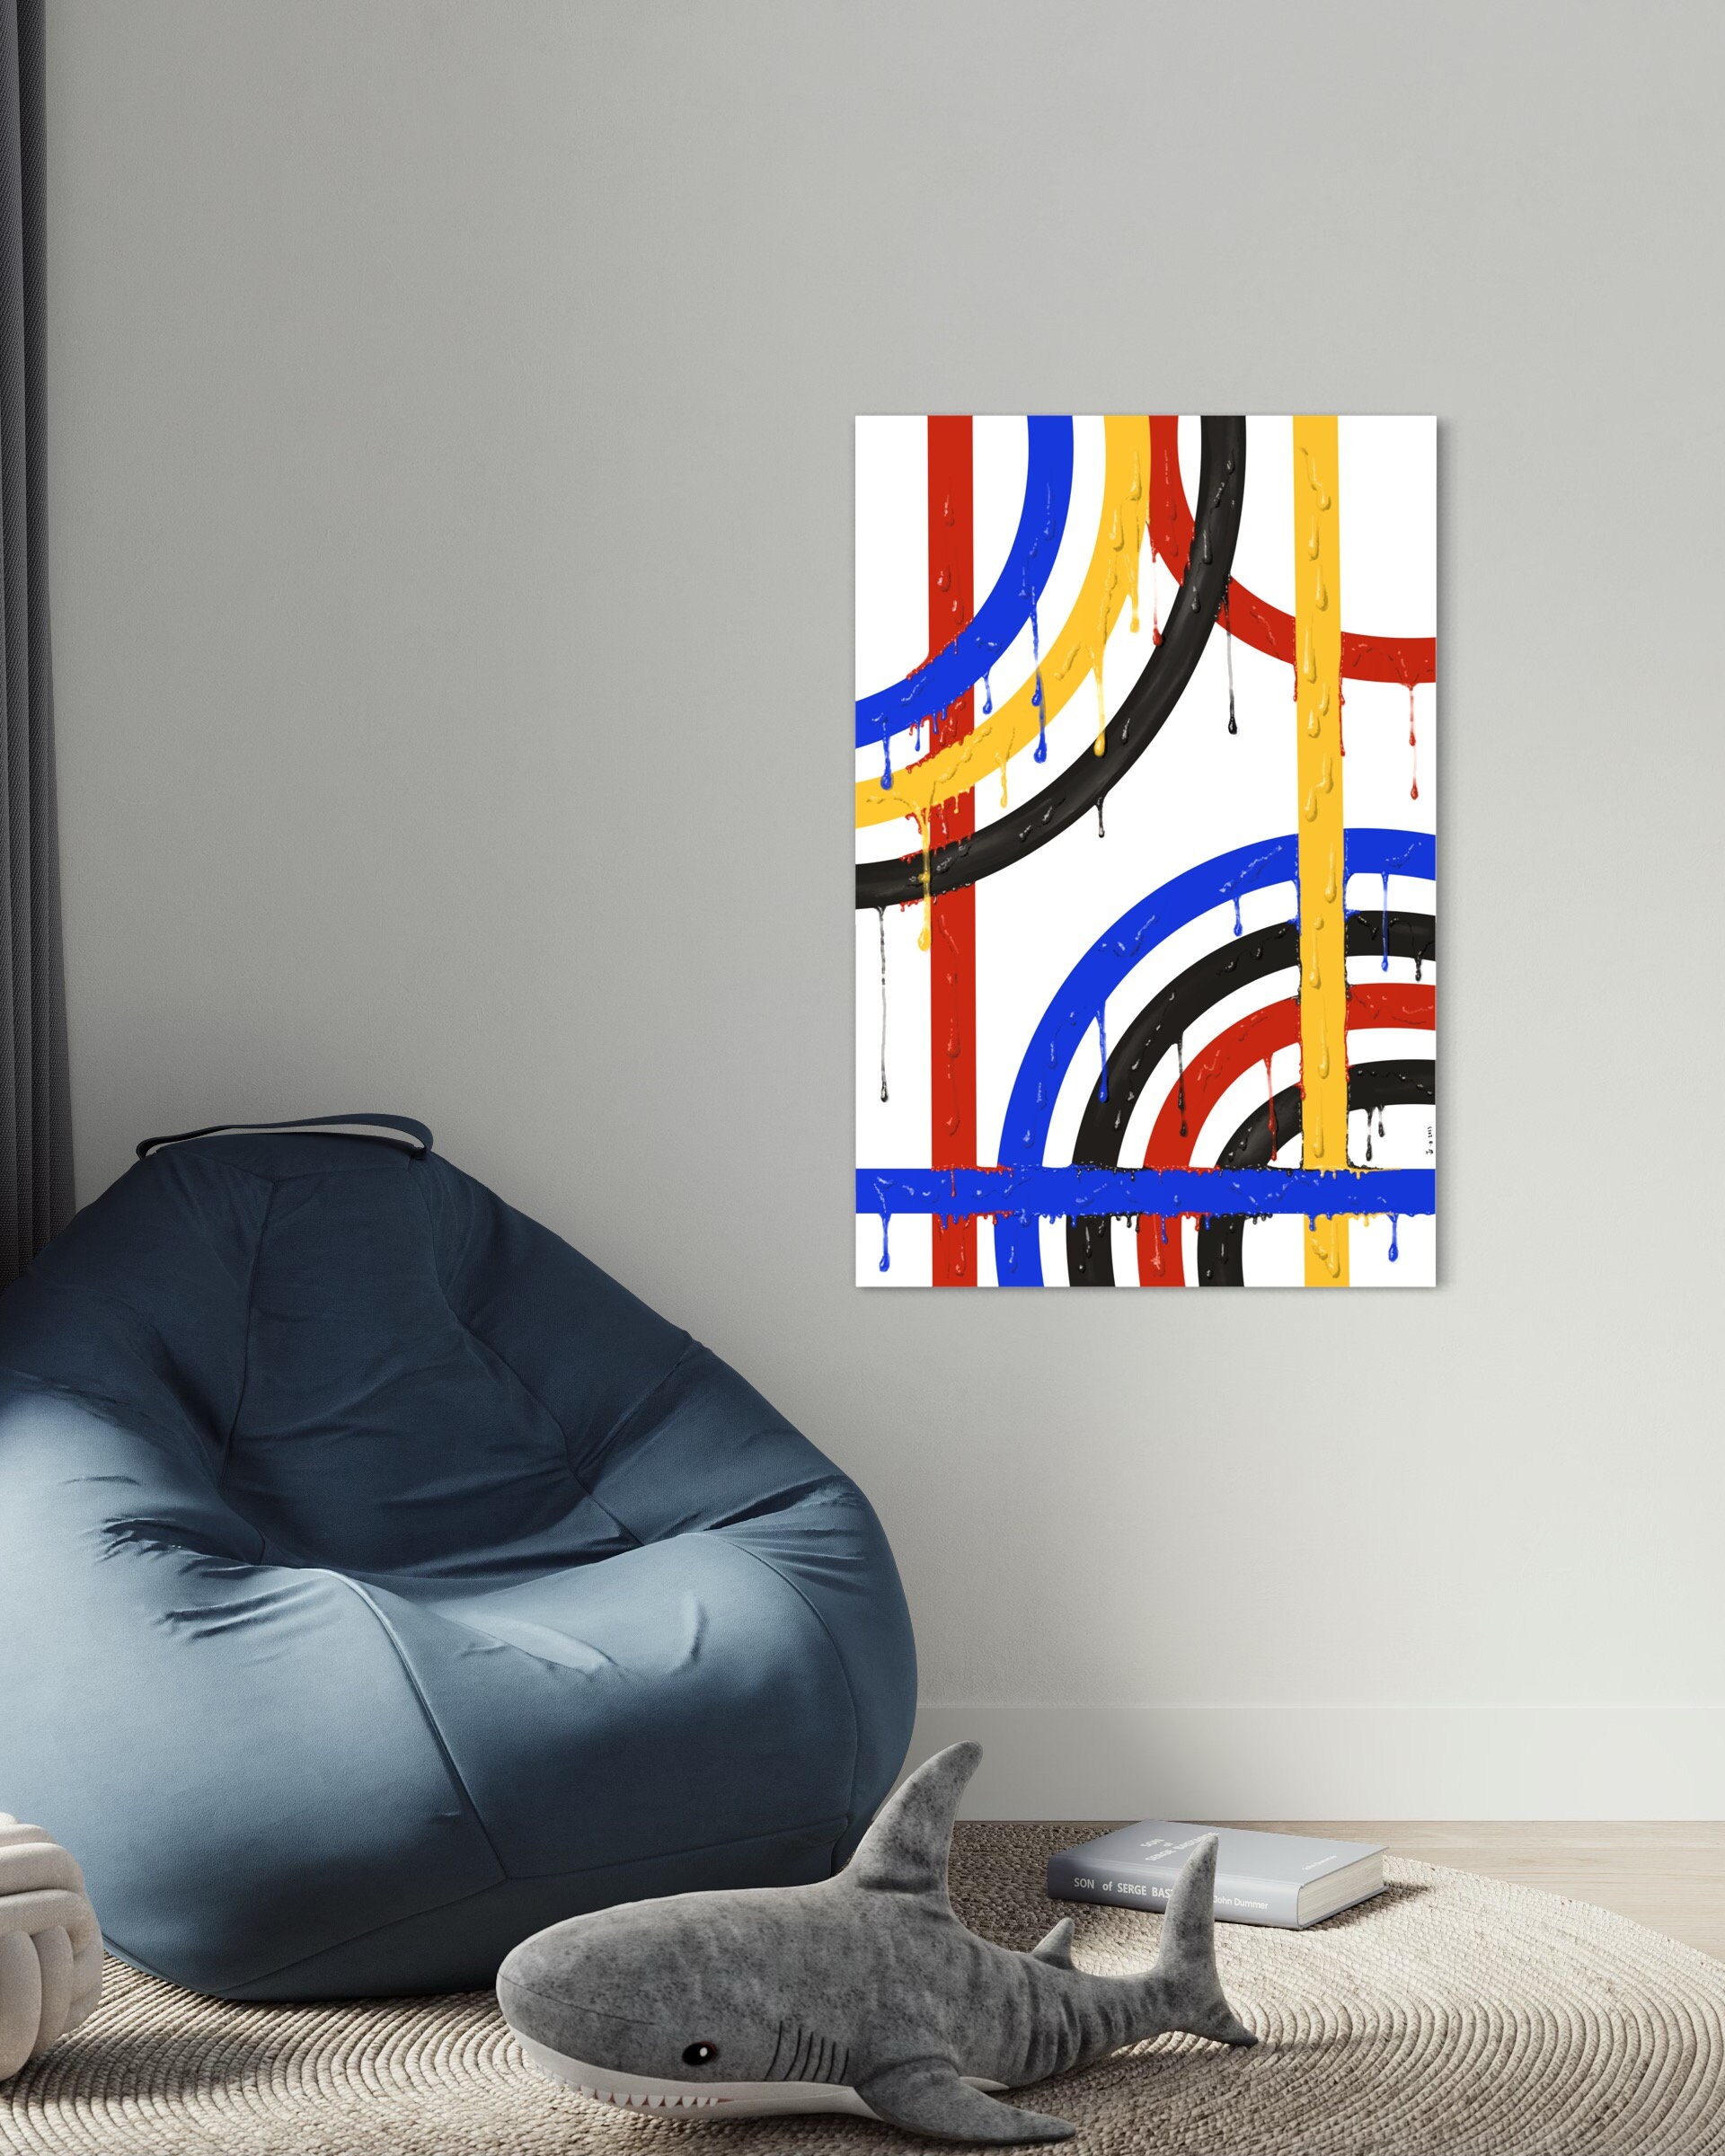 RUSH Abstract Painting Wall Art Print on Canvas High - Etsy